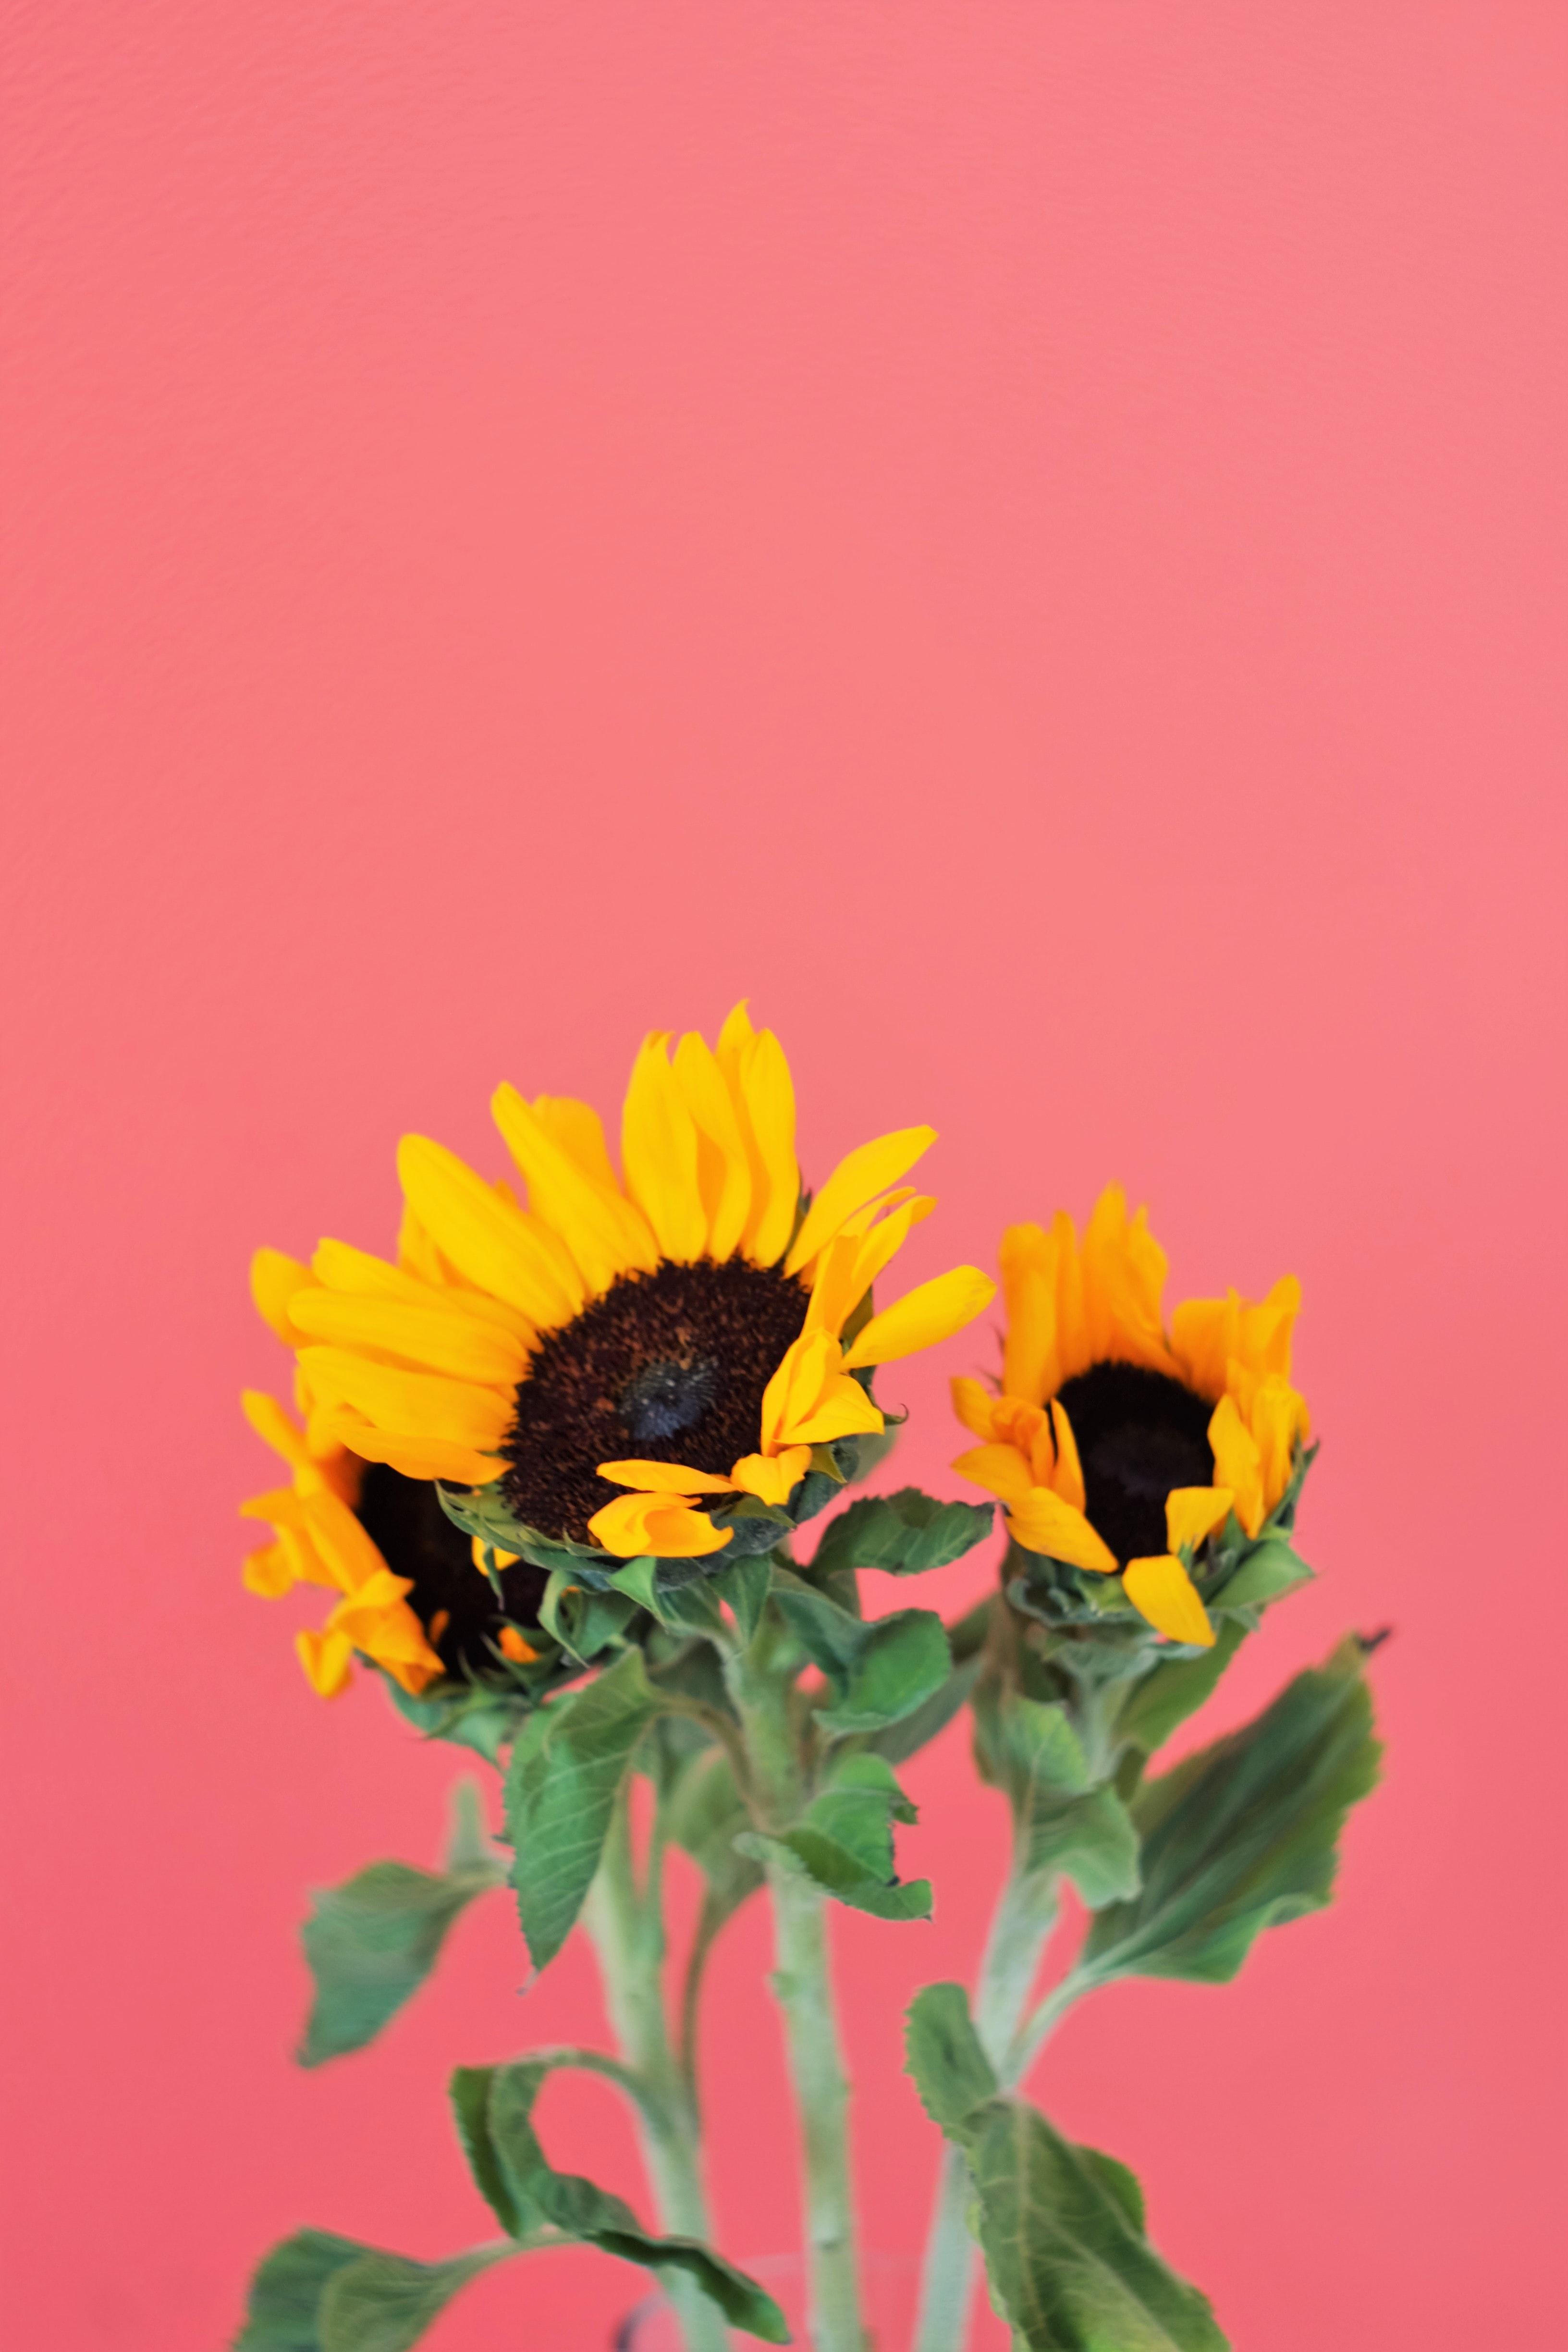 Pin by iae on aesthetic  Flower iphone wallpaper Sunflower wallpaper  Iphone wallpaper fall